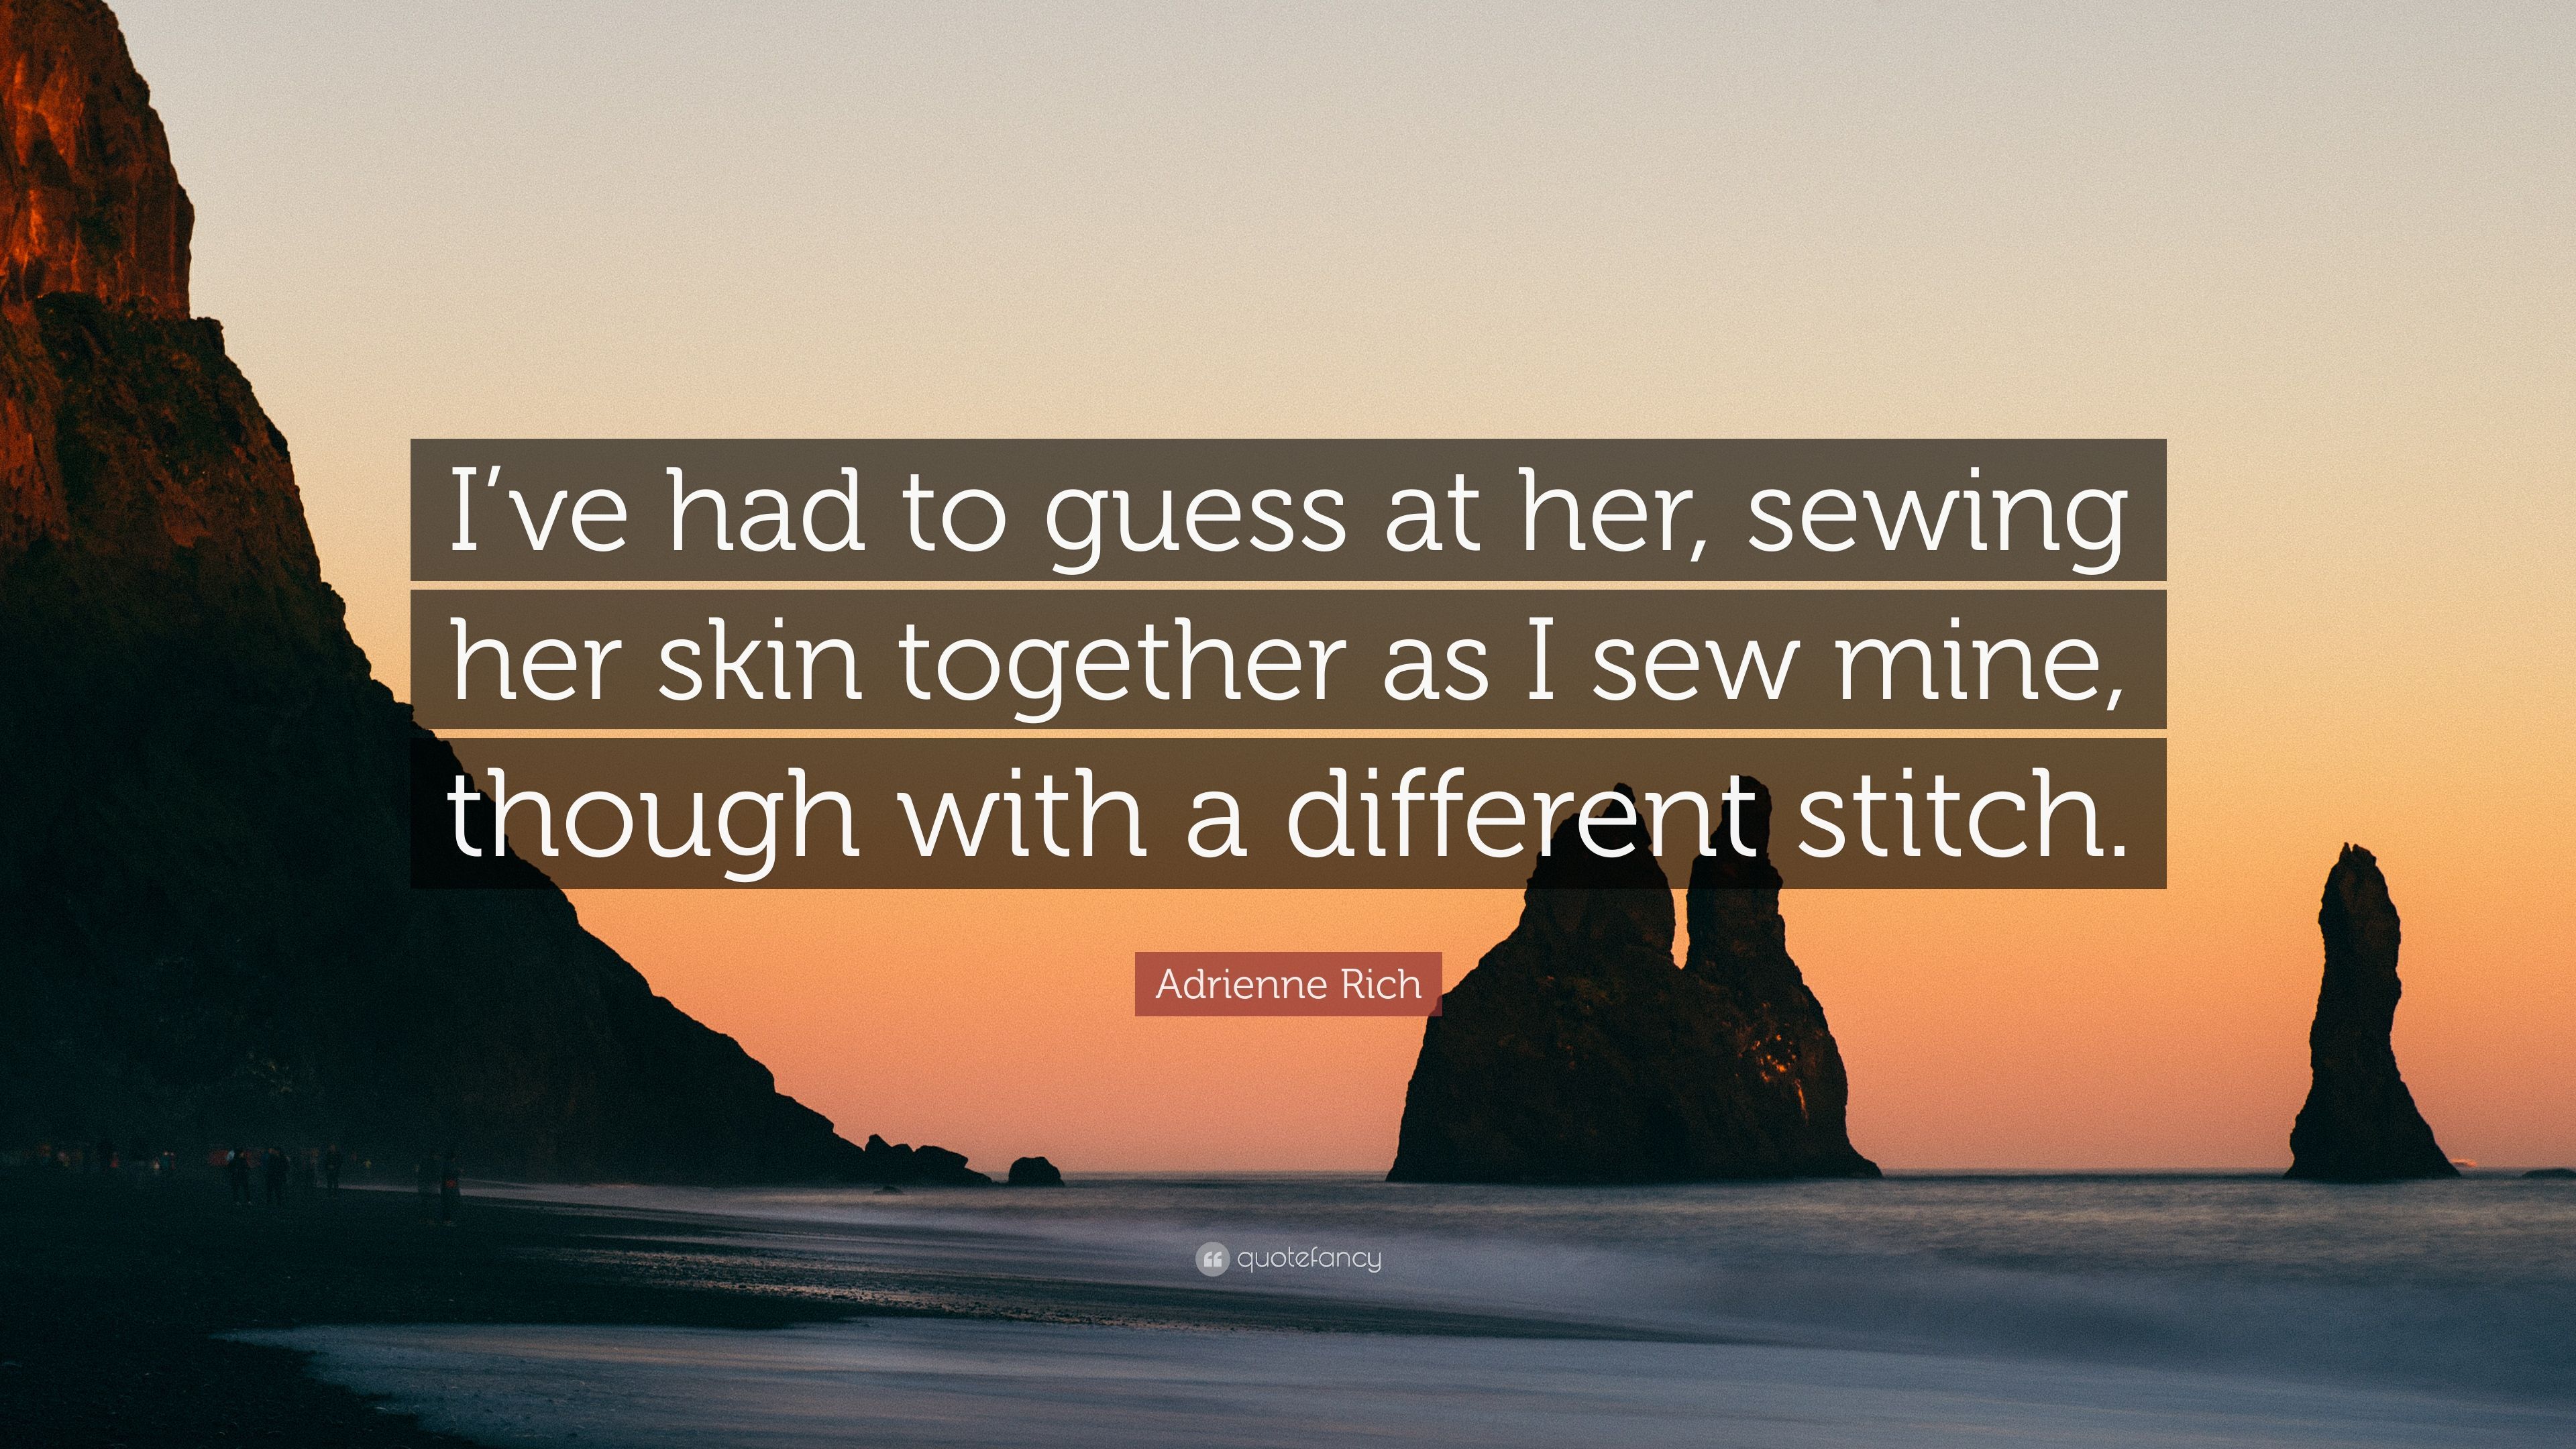 Adrienne Rich Quote: “I've had to guess at her, sewing her skin together as I sew mine, though with a different stitch.” (6 wallpaper)